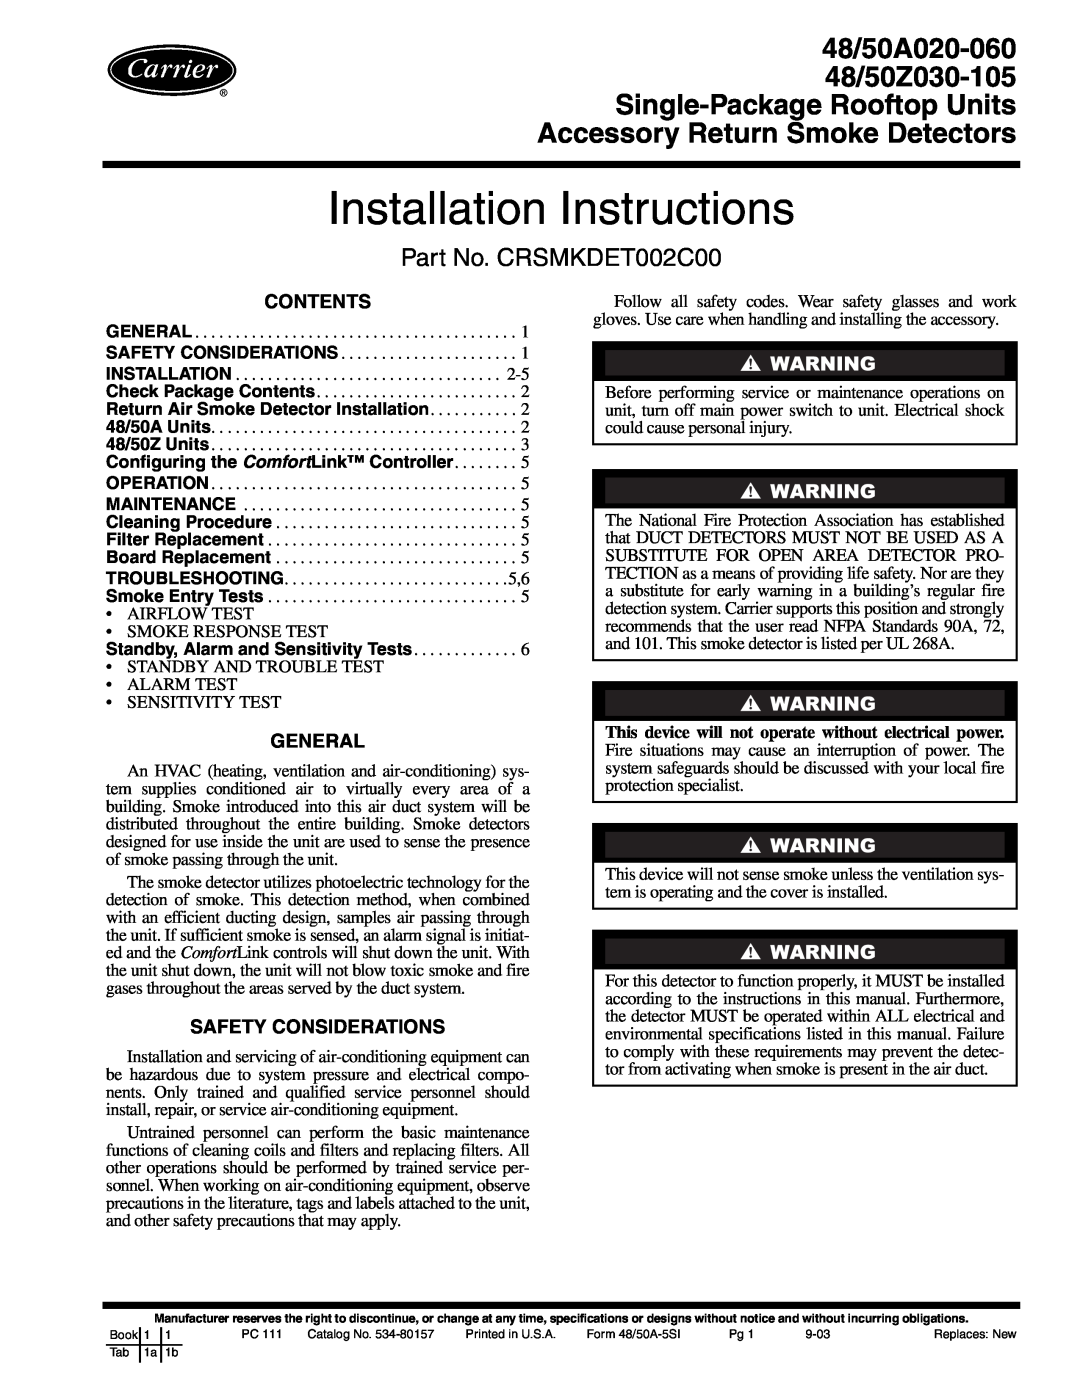 Carrier 48/50A020-060 installation instructions Contents, General, Safety Considerations, Installation Instructions 